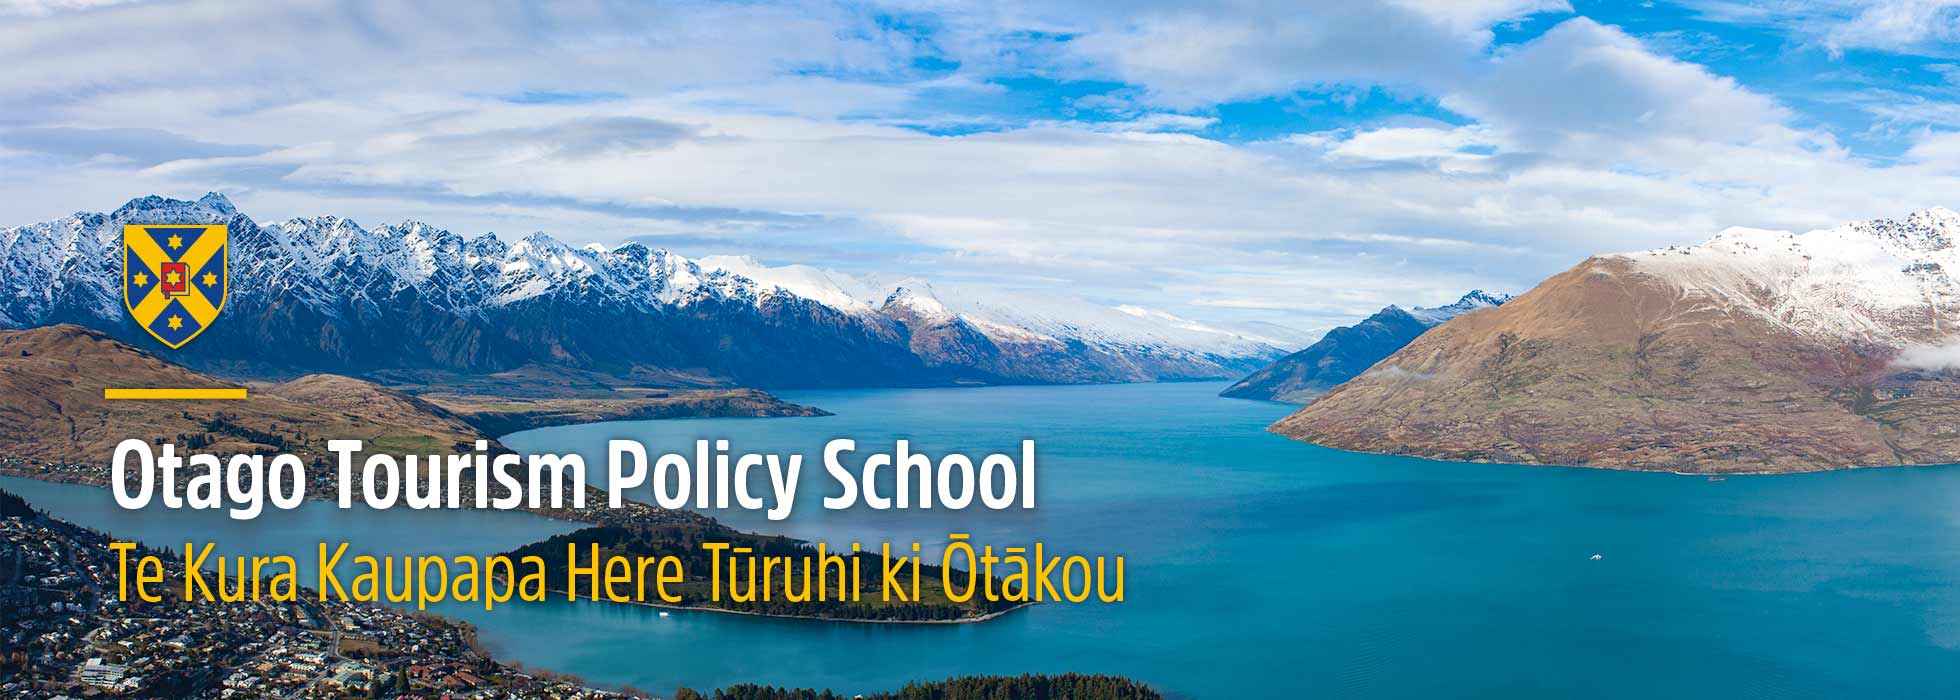 tourism policy school